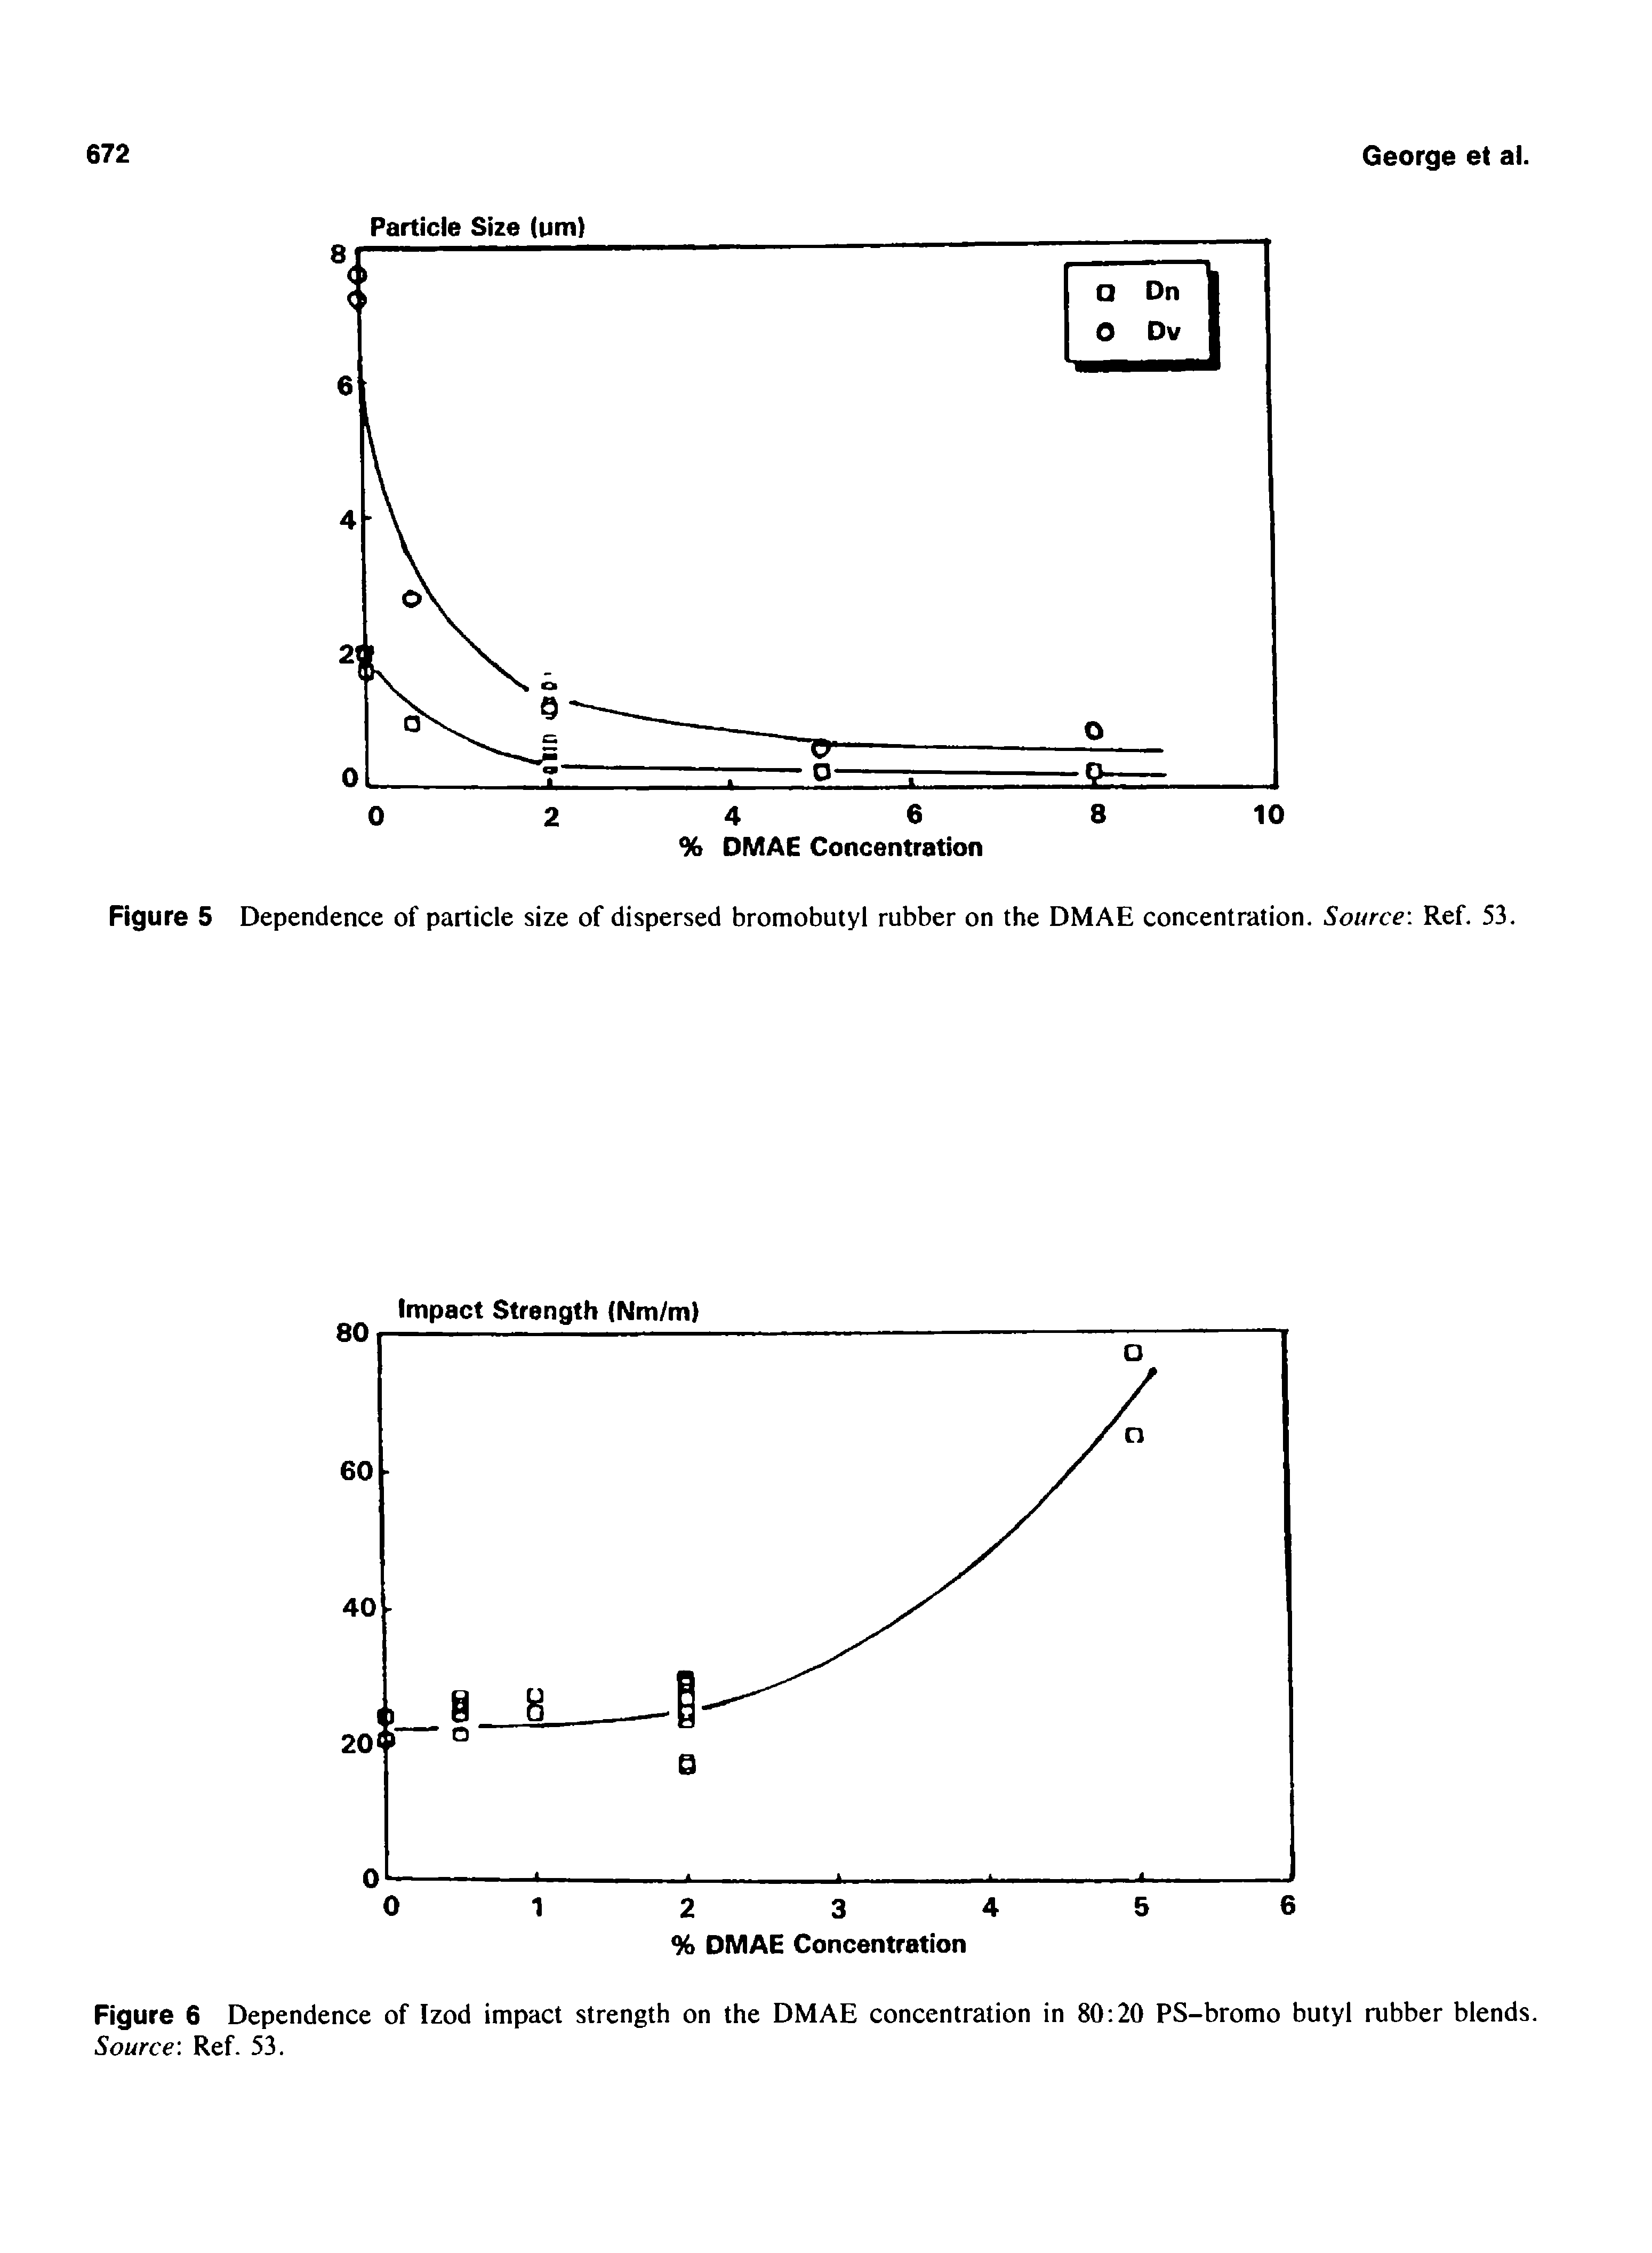 Figure 5 Dependence of particle size of dispersed bromobutyl rubber on the DMAE concentration. Source Ref. 53.